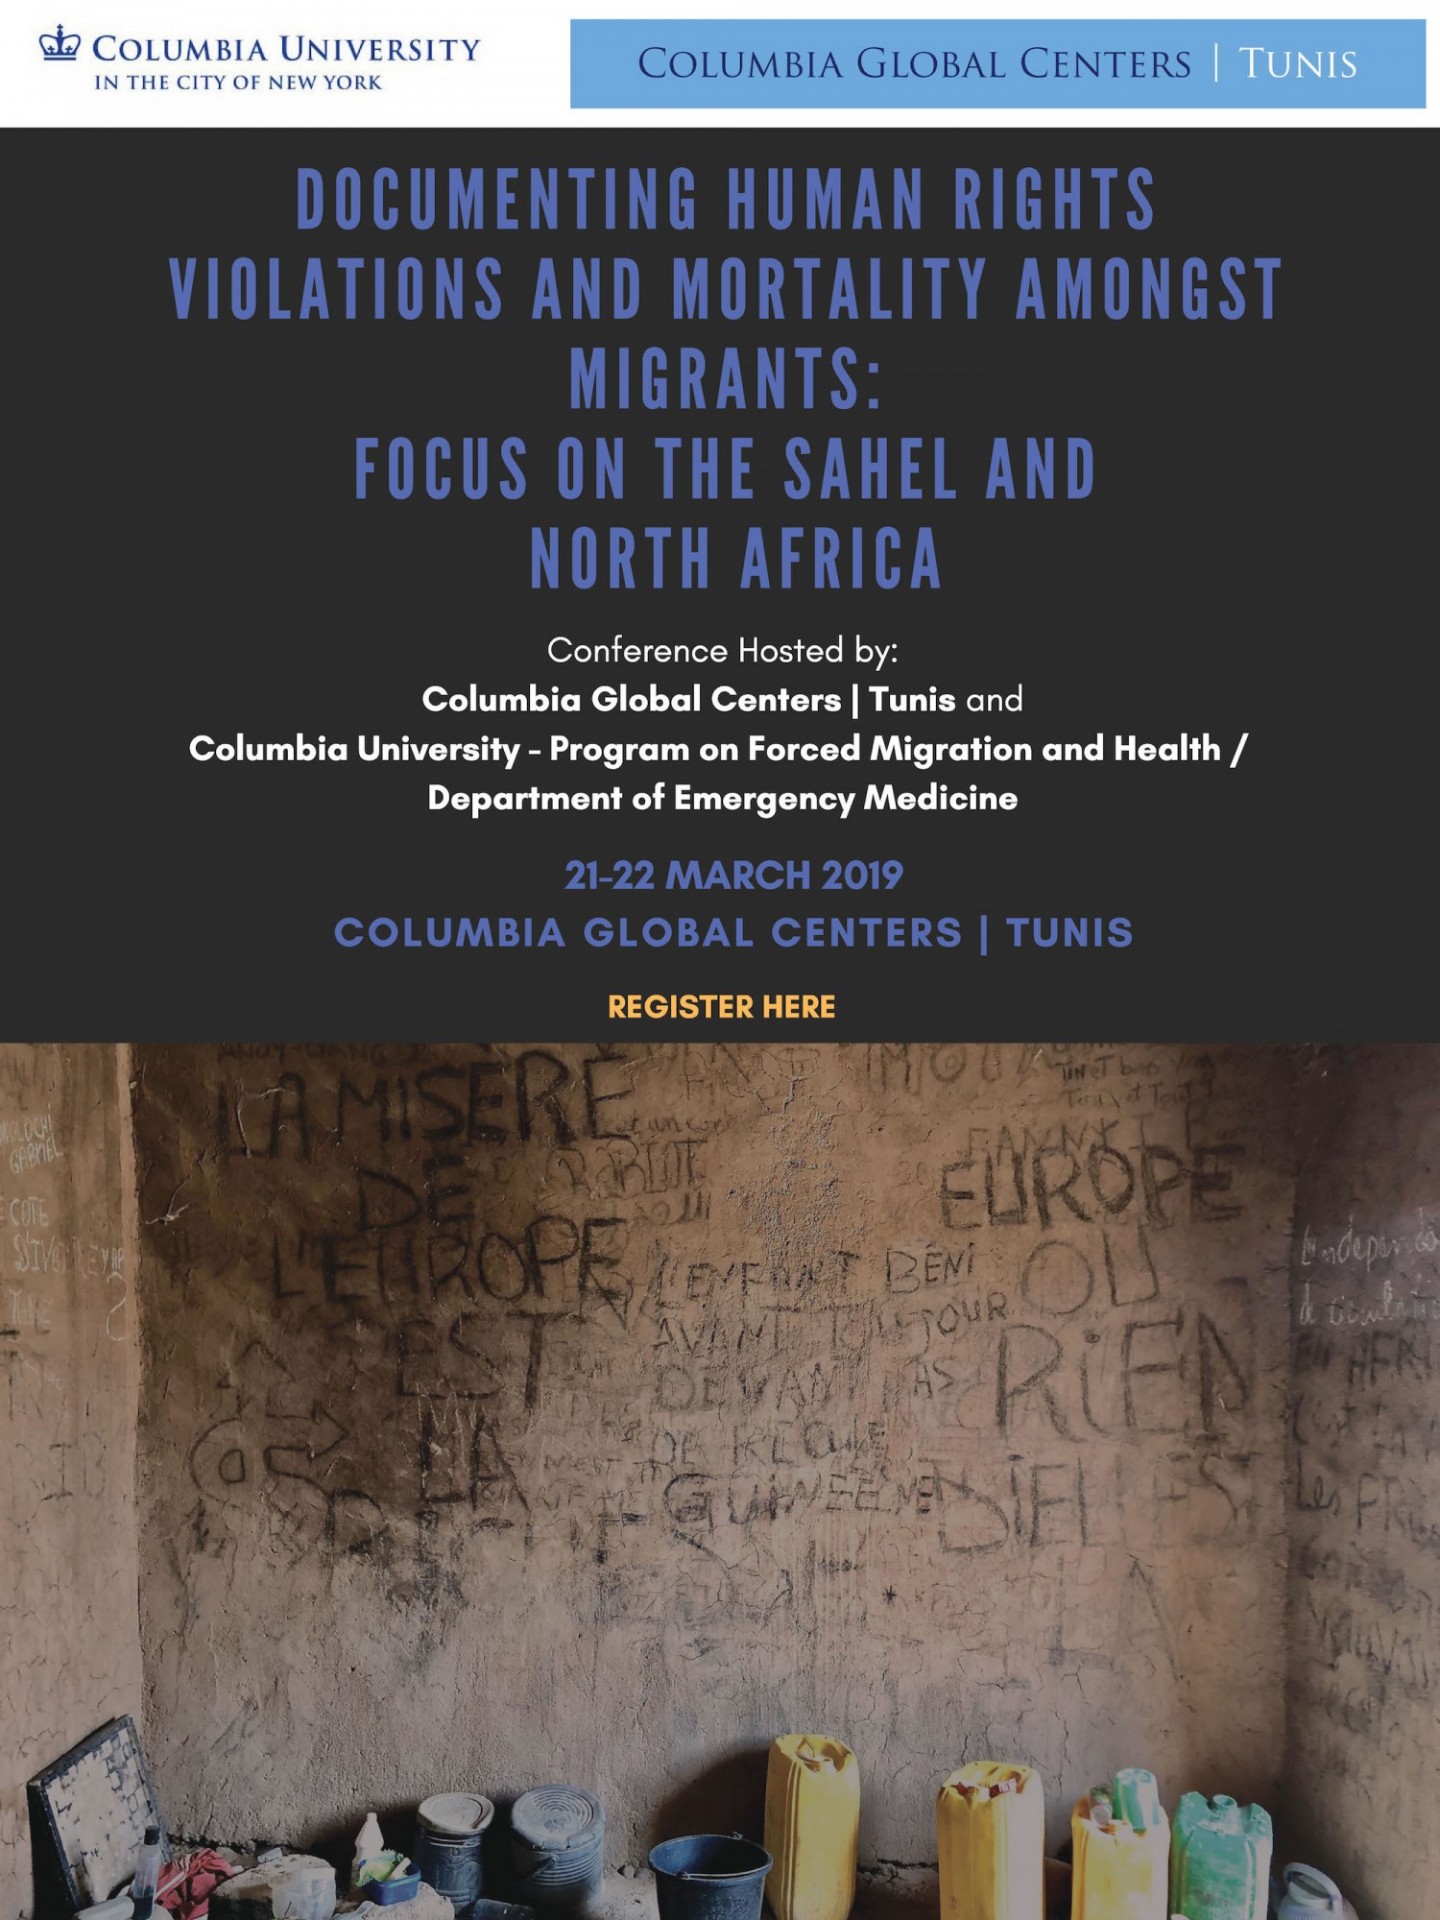 Documenting Human Rights Violations and Mortality amongst Migrants: A Focus on the Sahel and North Africa